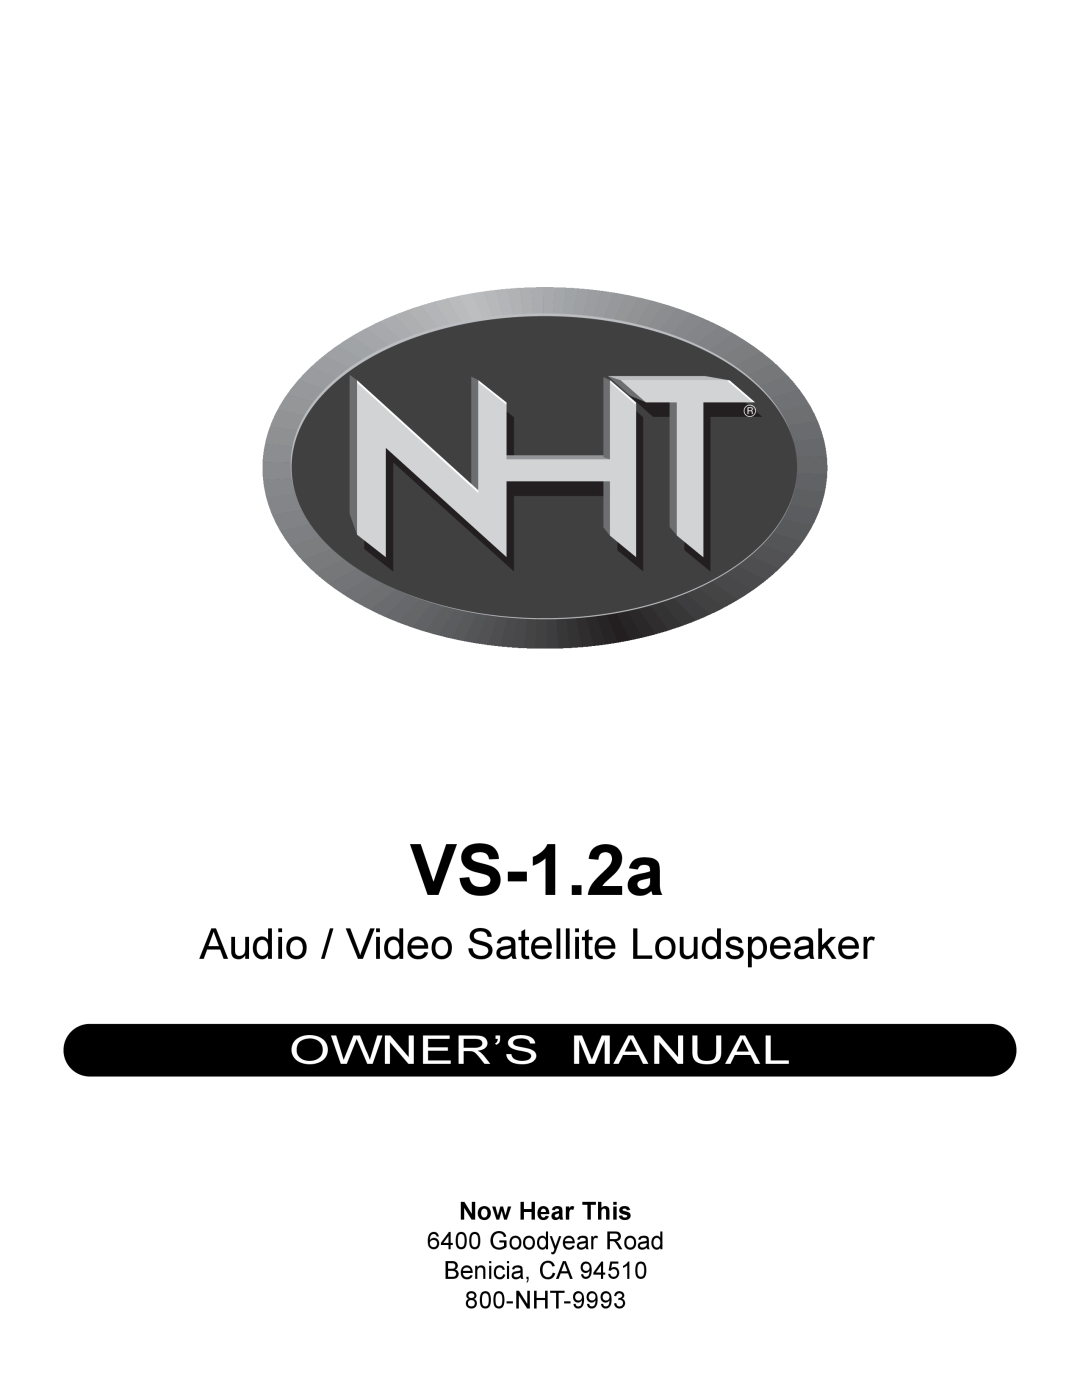 NHT VS-1.2a owner manual Now Hear This, Audio / Video Satellite Loudspeaker, Goodyear Road Benicia, CA 800-NHT-9993 